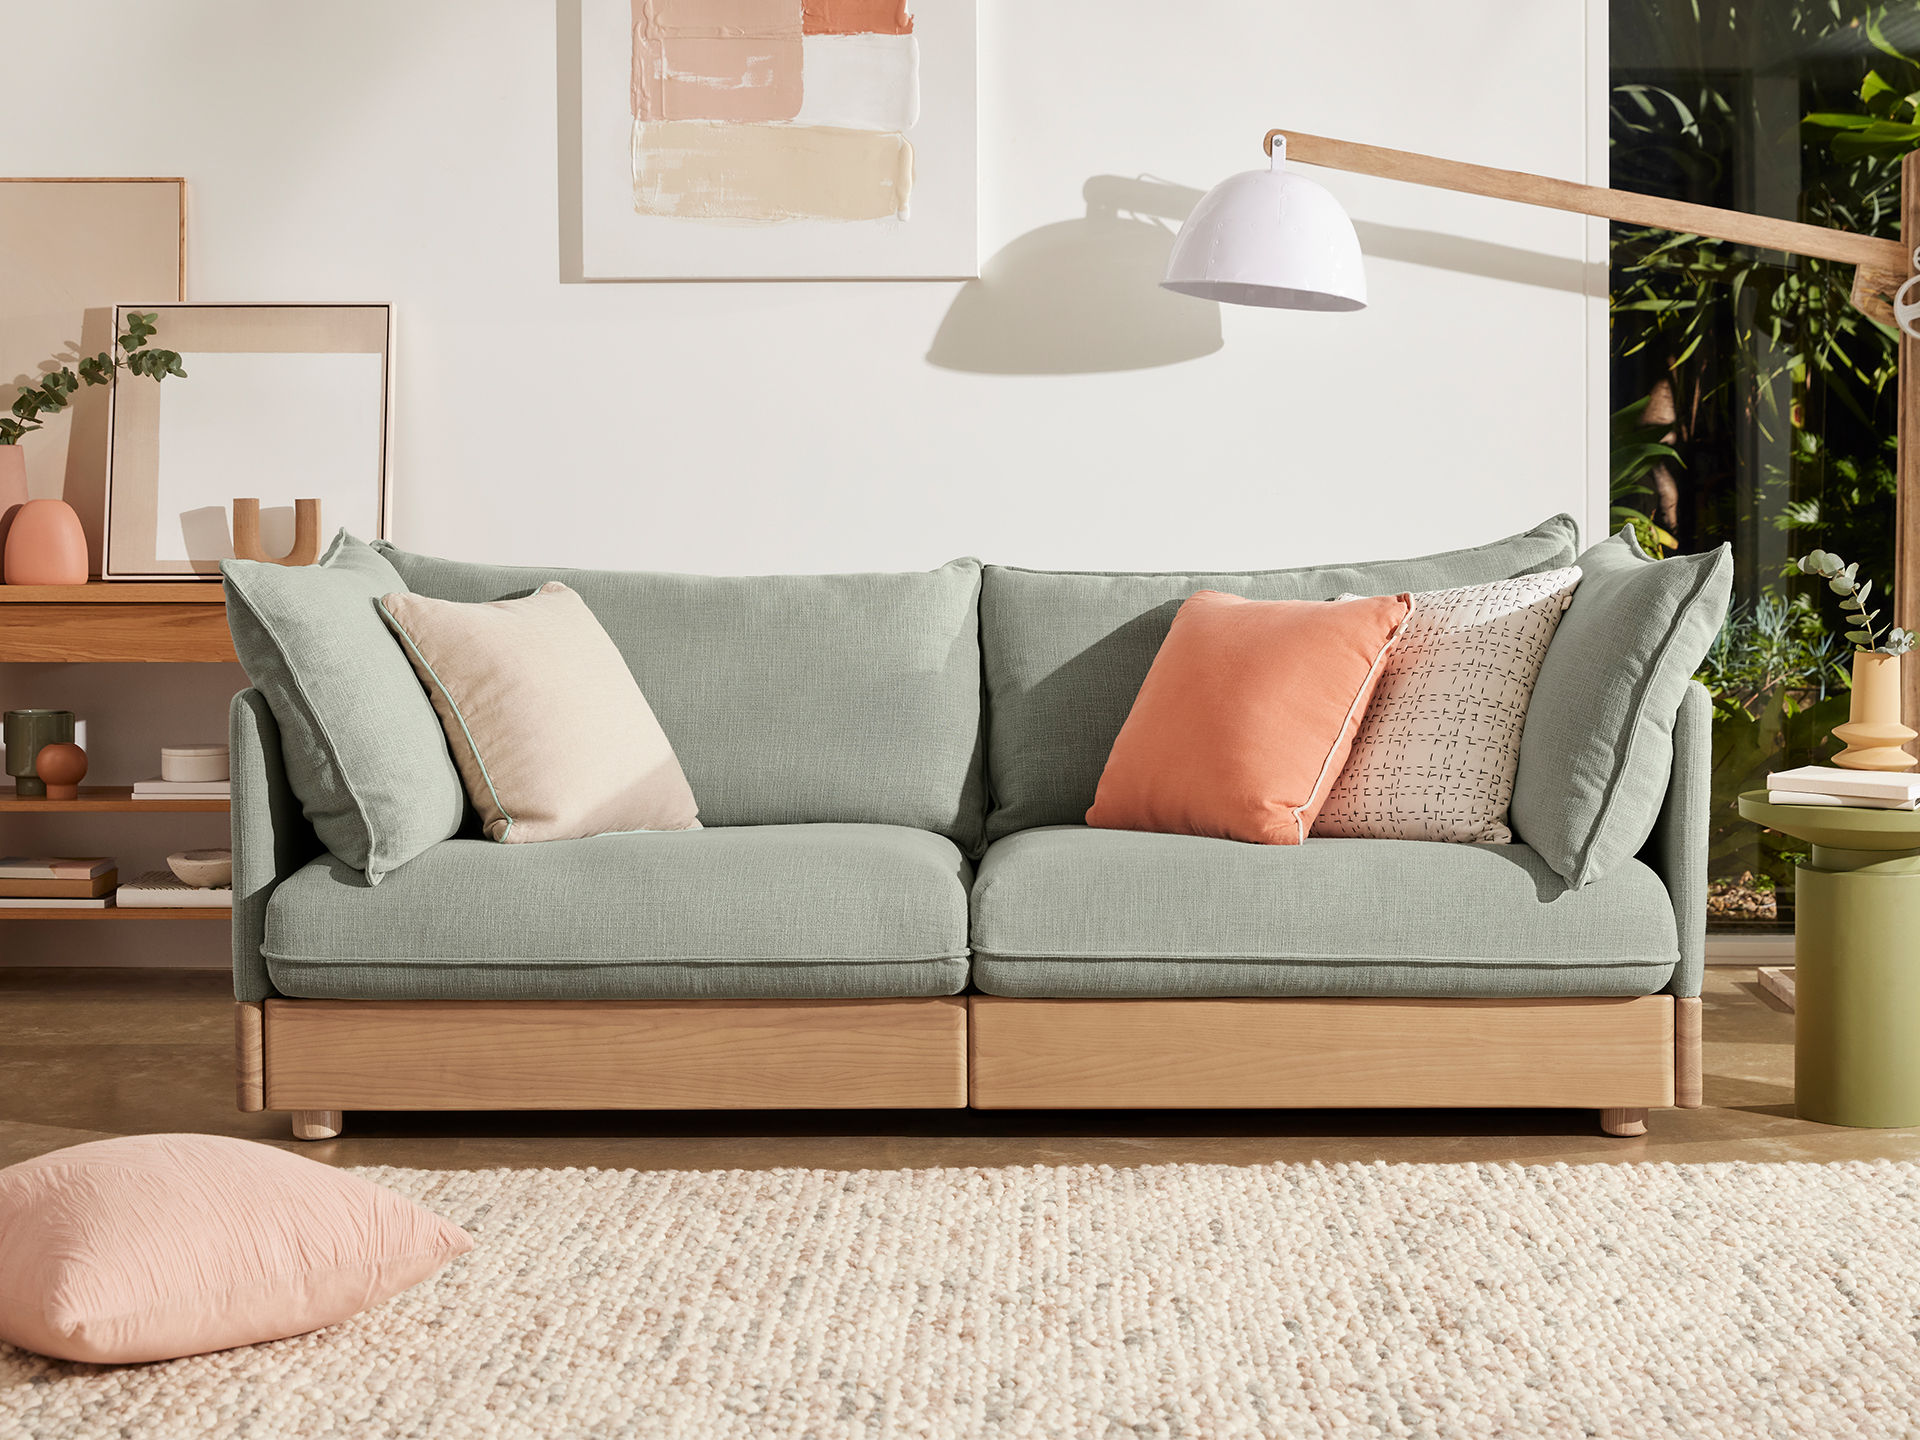 Three seater sofa with light green linen upholstery and timber storage shelves. 